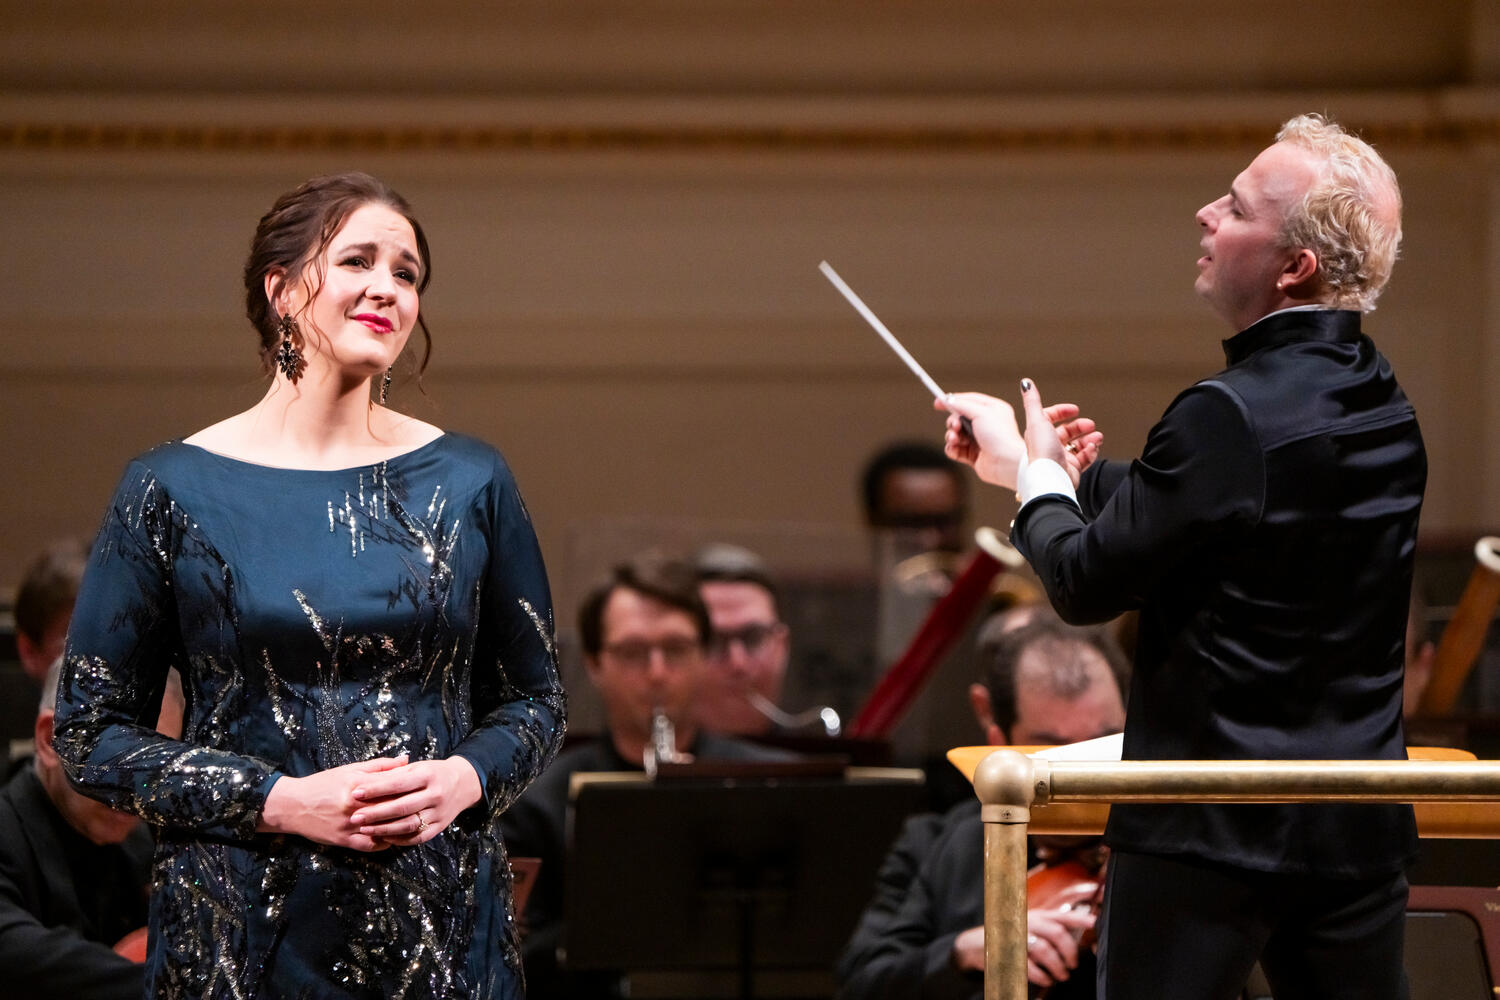 A woman in a blue dress sings while a conductor conducts